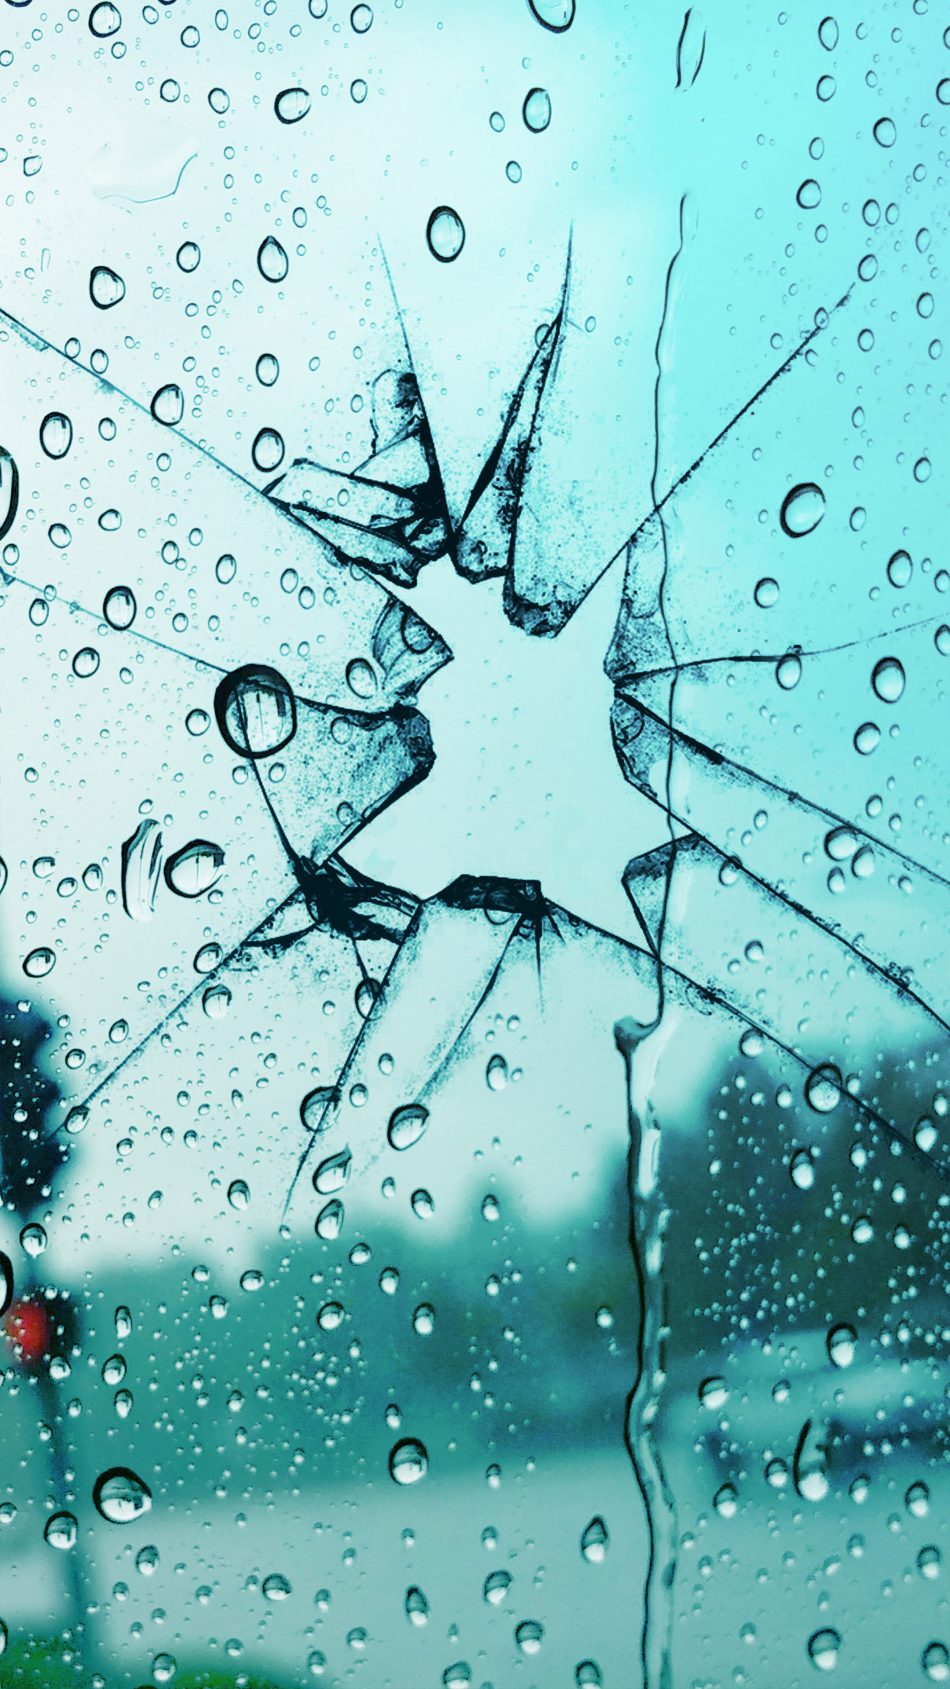 Drizzle Photos, Download The BEST Free Drizzle Stock Photos & HD Images